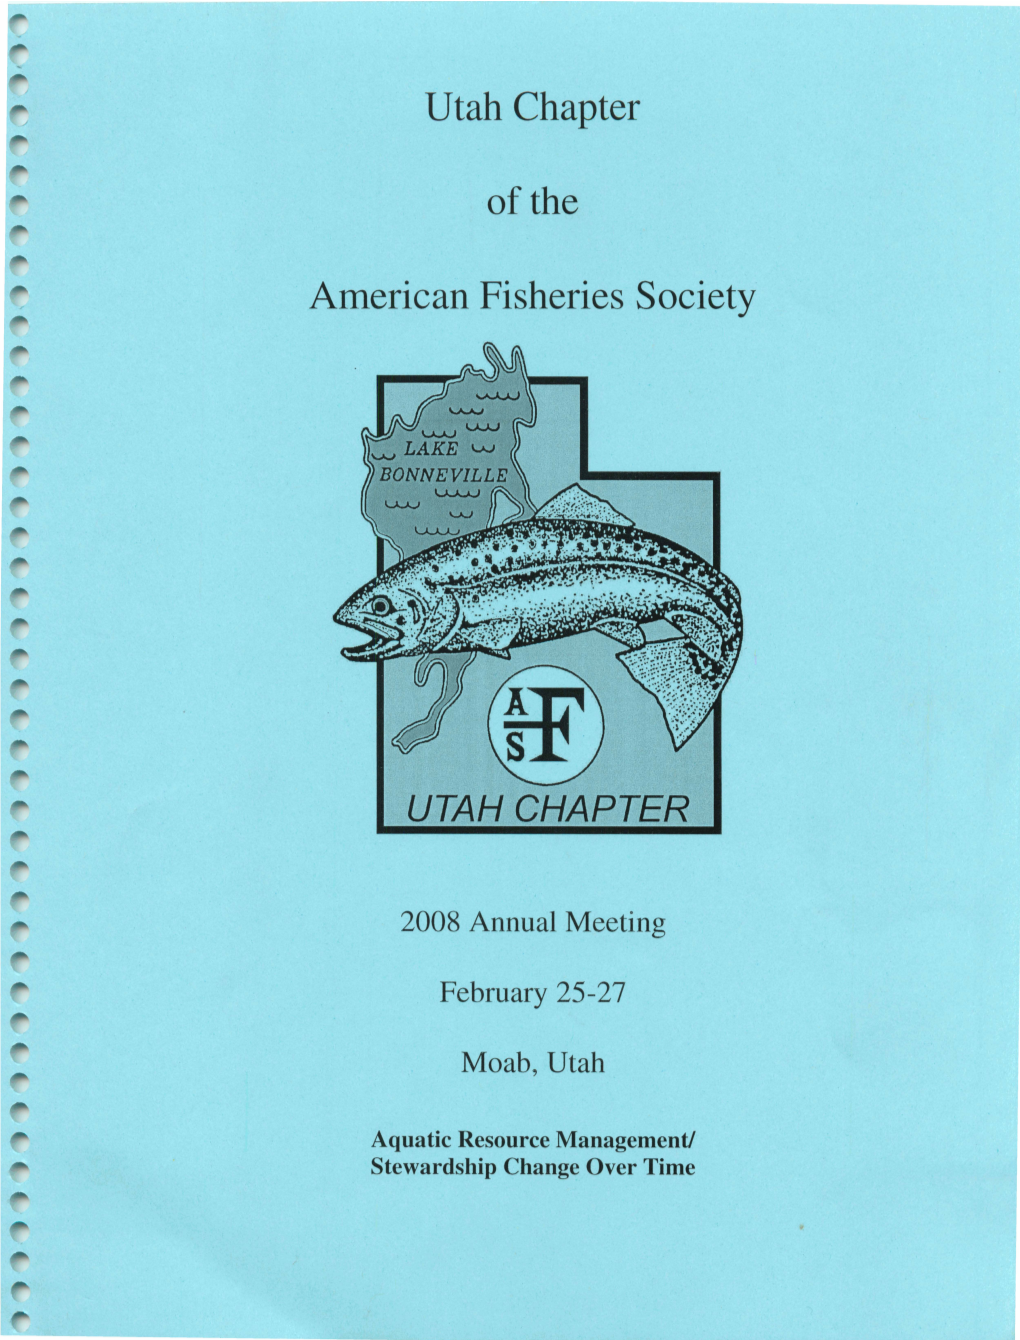 Utah Chapter of the American Fisheries Society